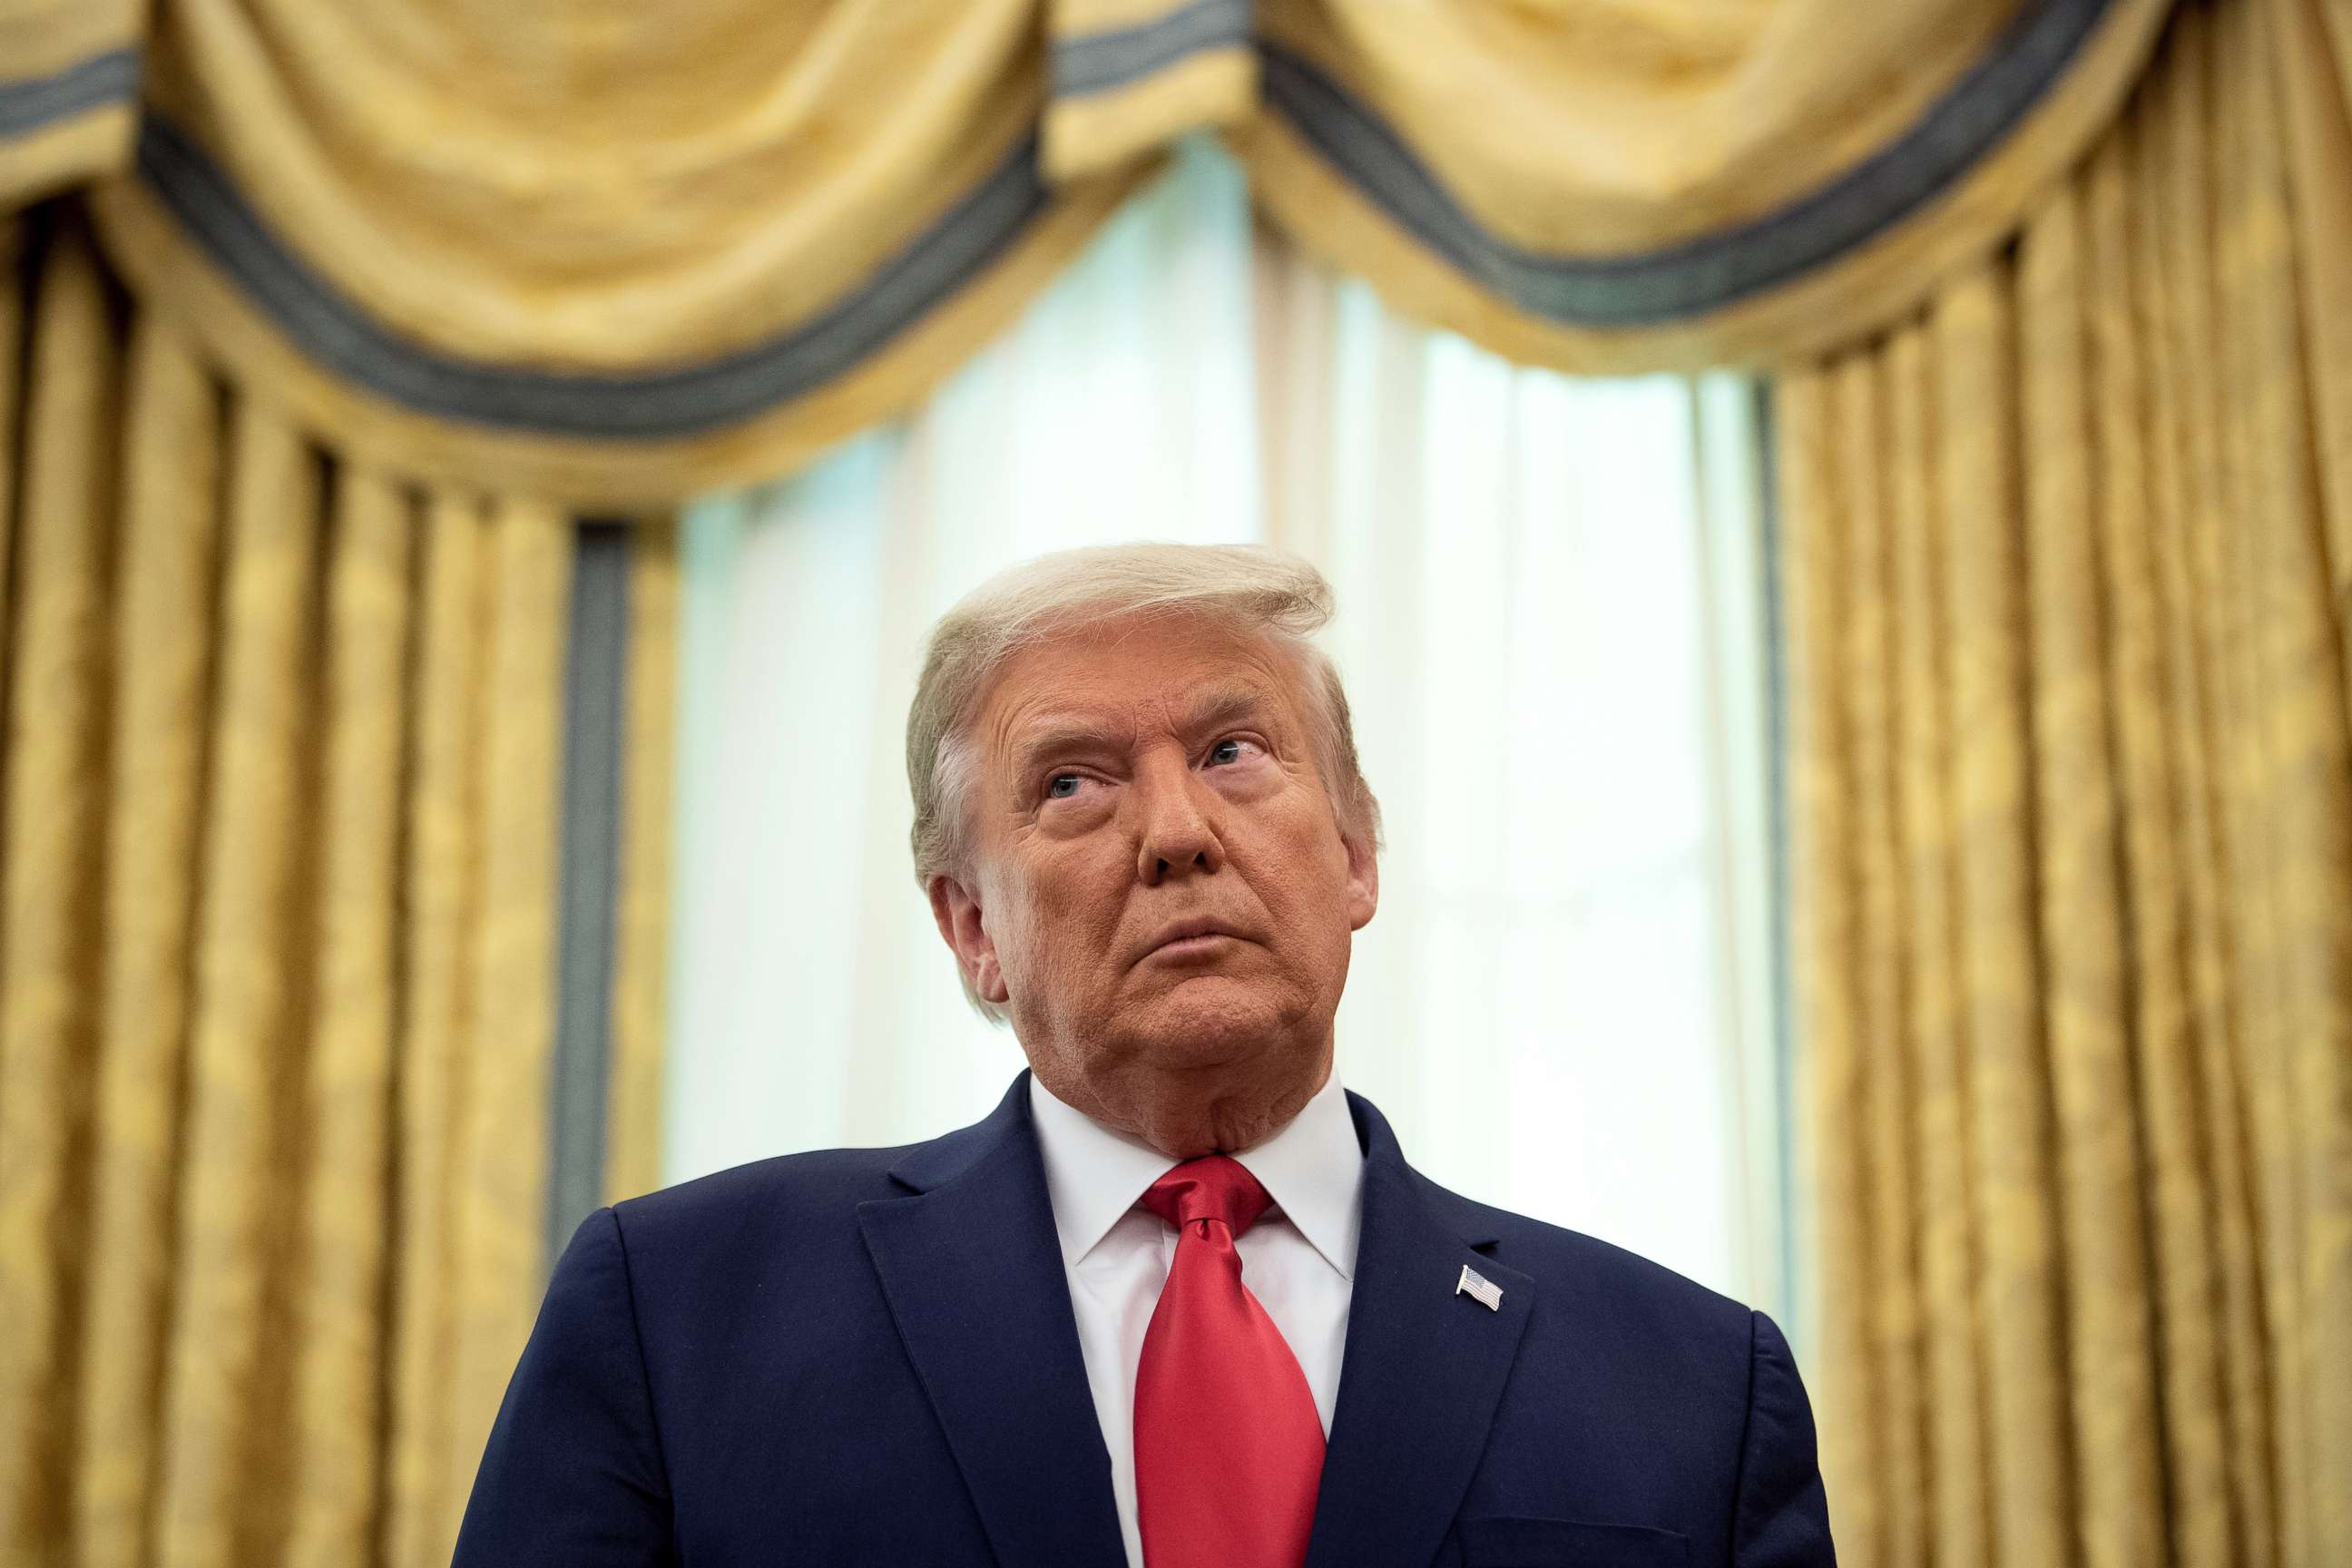 PHOTO: President Donald Trump listens during a ceremony in the Oval Office of the White House, Dec. 3, 2020, in Washington, DC.